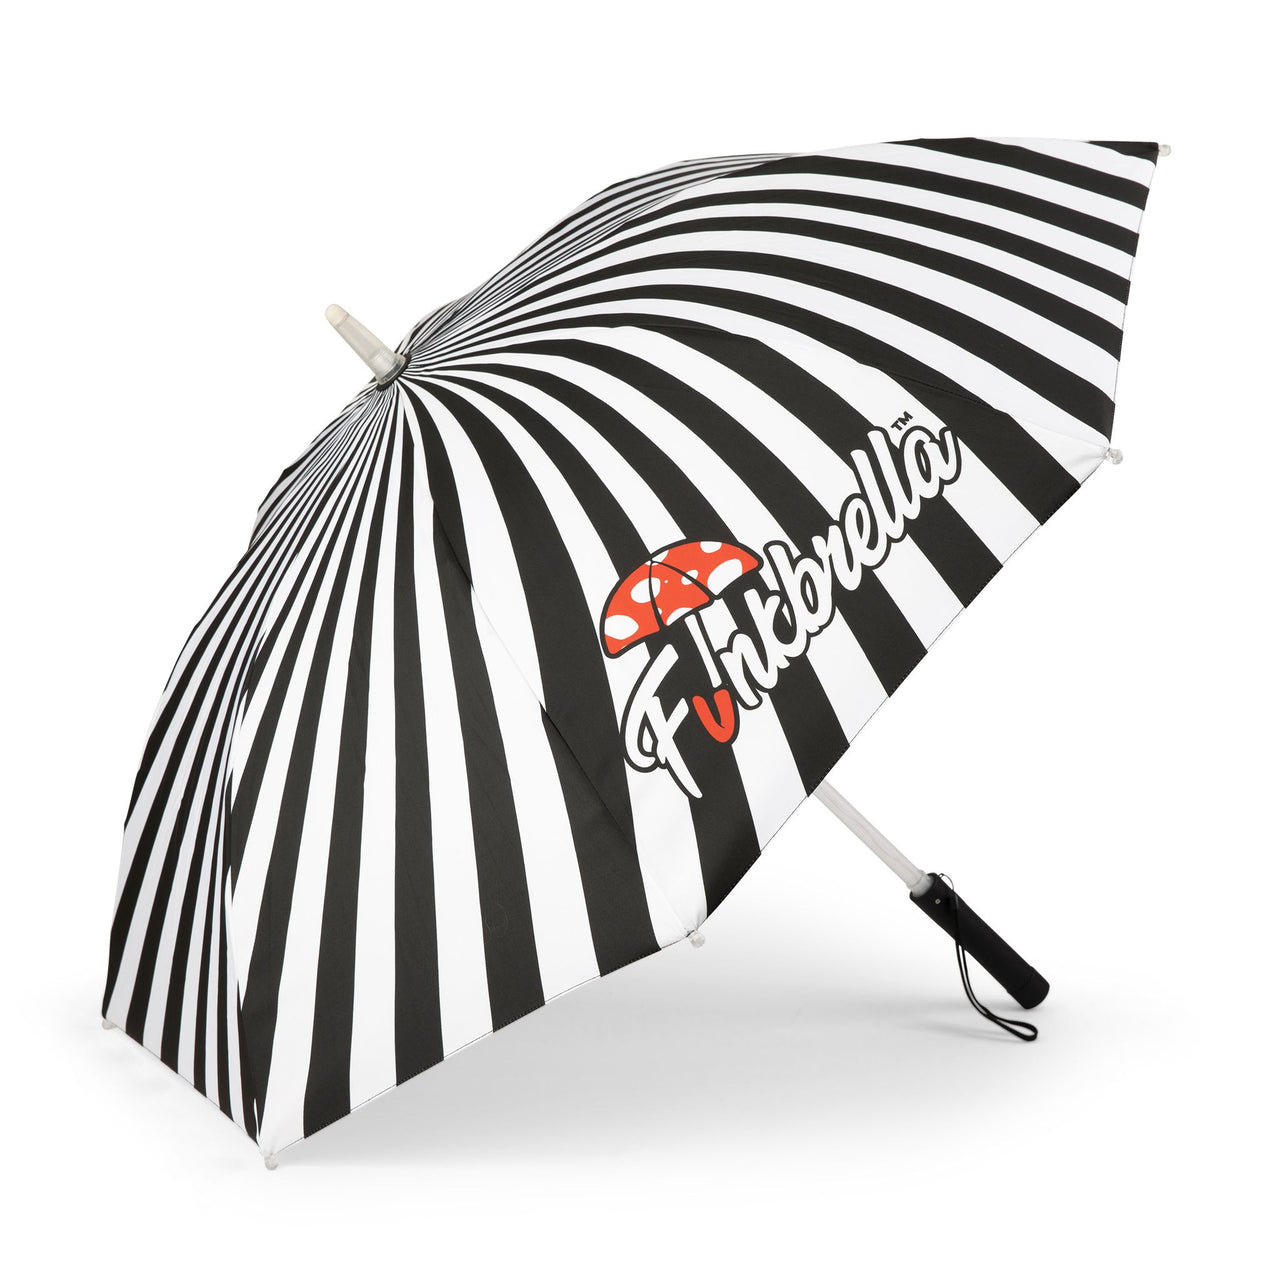 Hypnotic Trance Umbrella with Multi-Color LED Light Show, Strobe, Fade, Static LED Settings, AAA Batteries, 47" Canopy